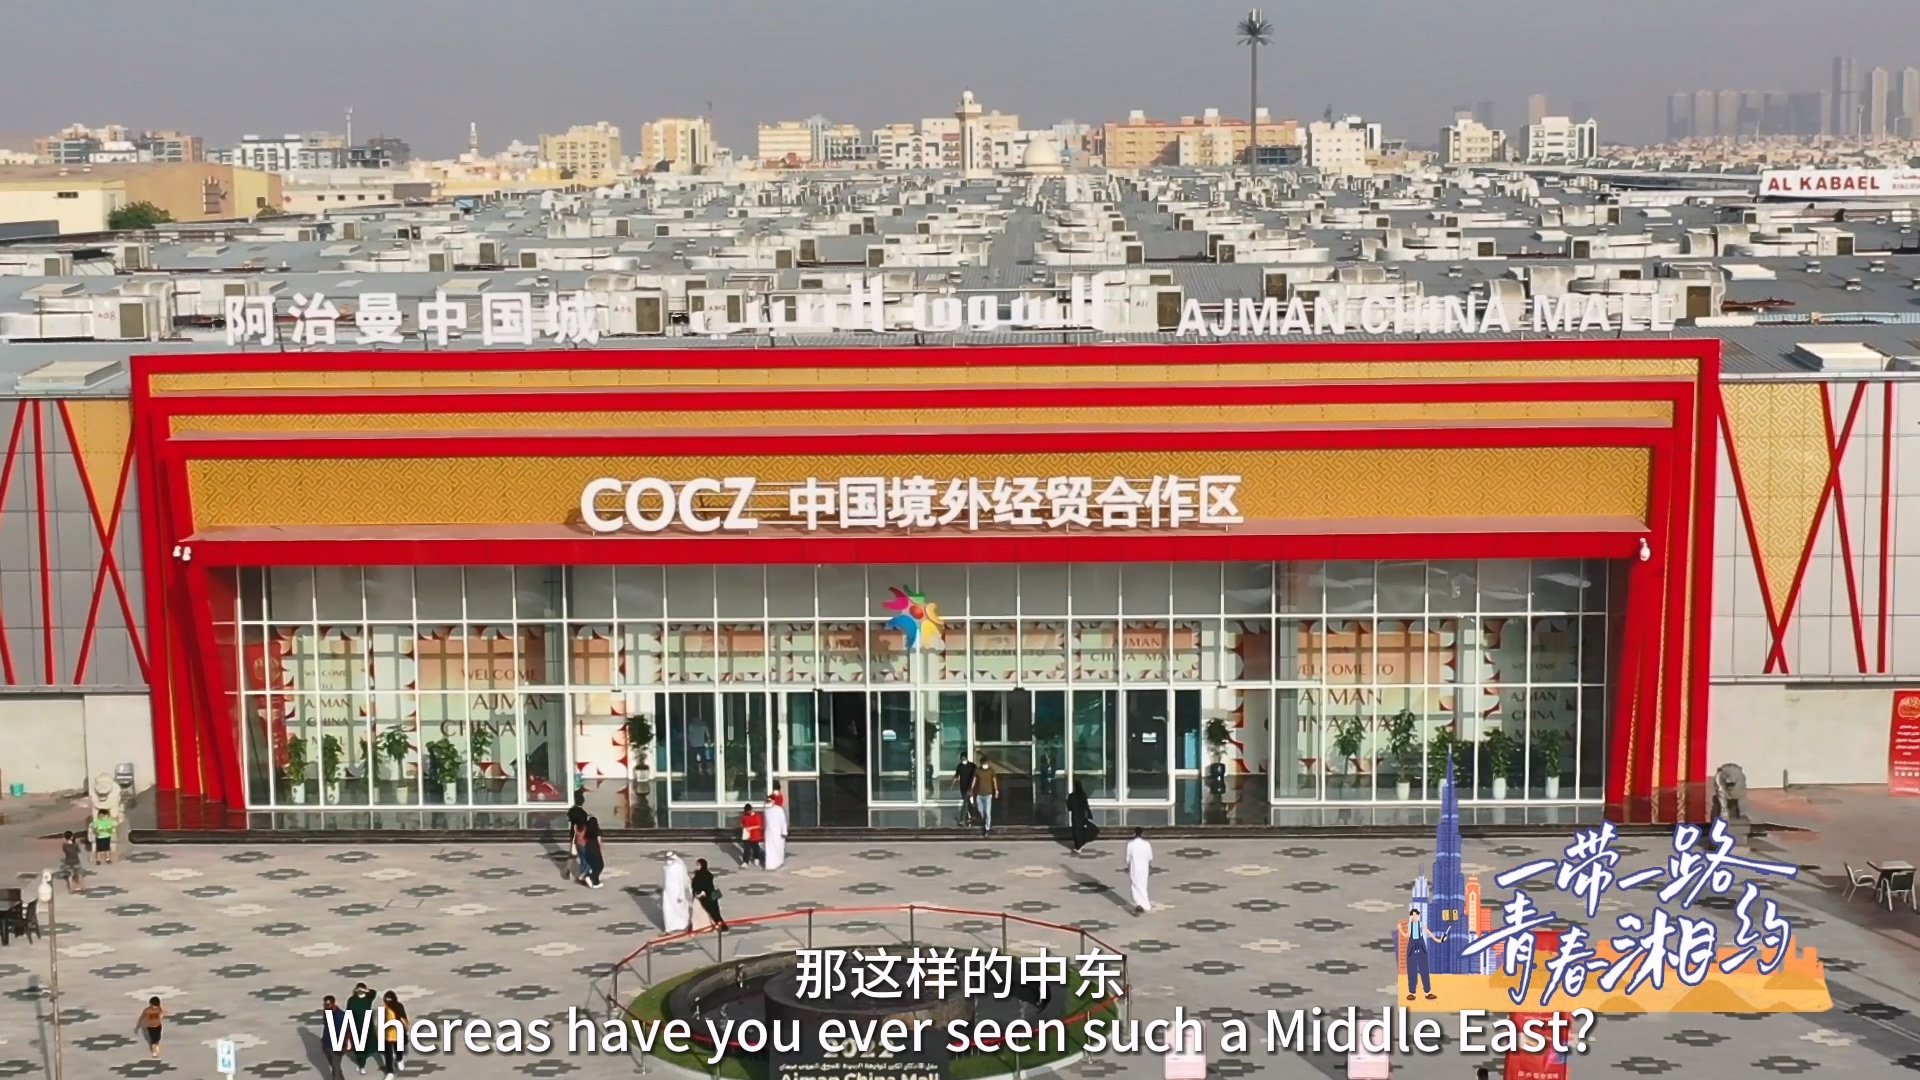 Ajman China Mall: Laying foundations for Middle Eastern development, welcoming Chinese enterprises